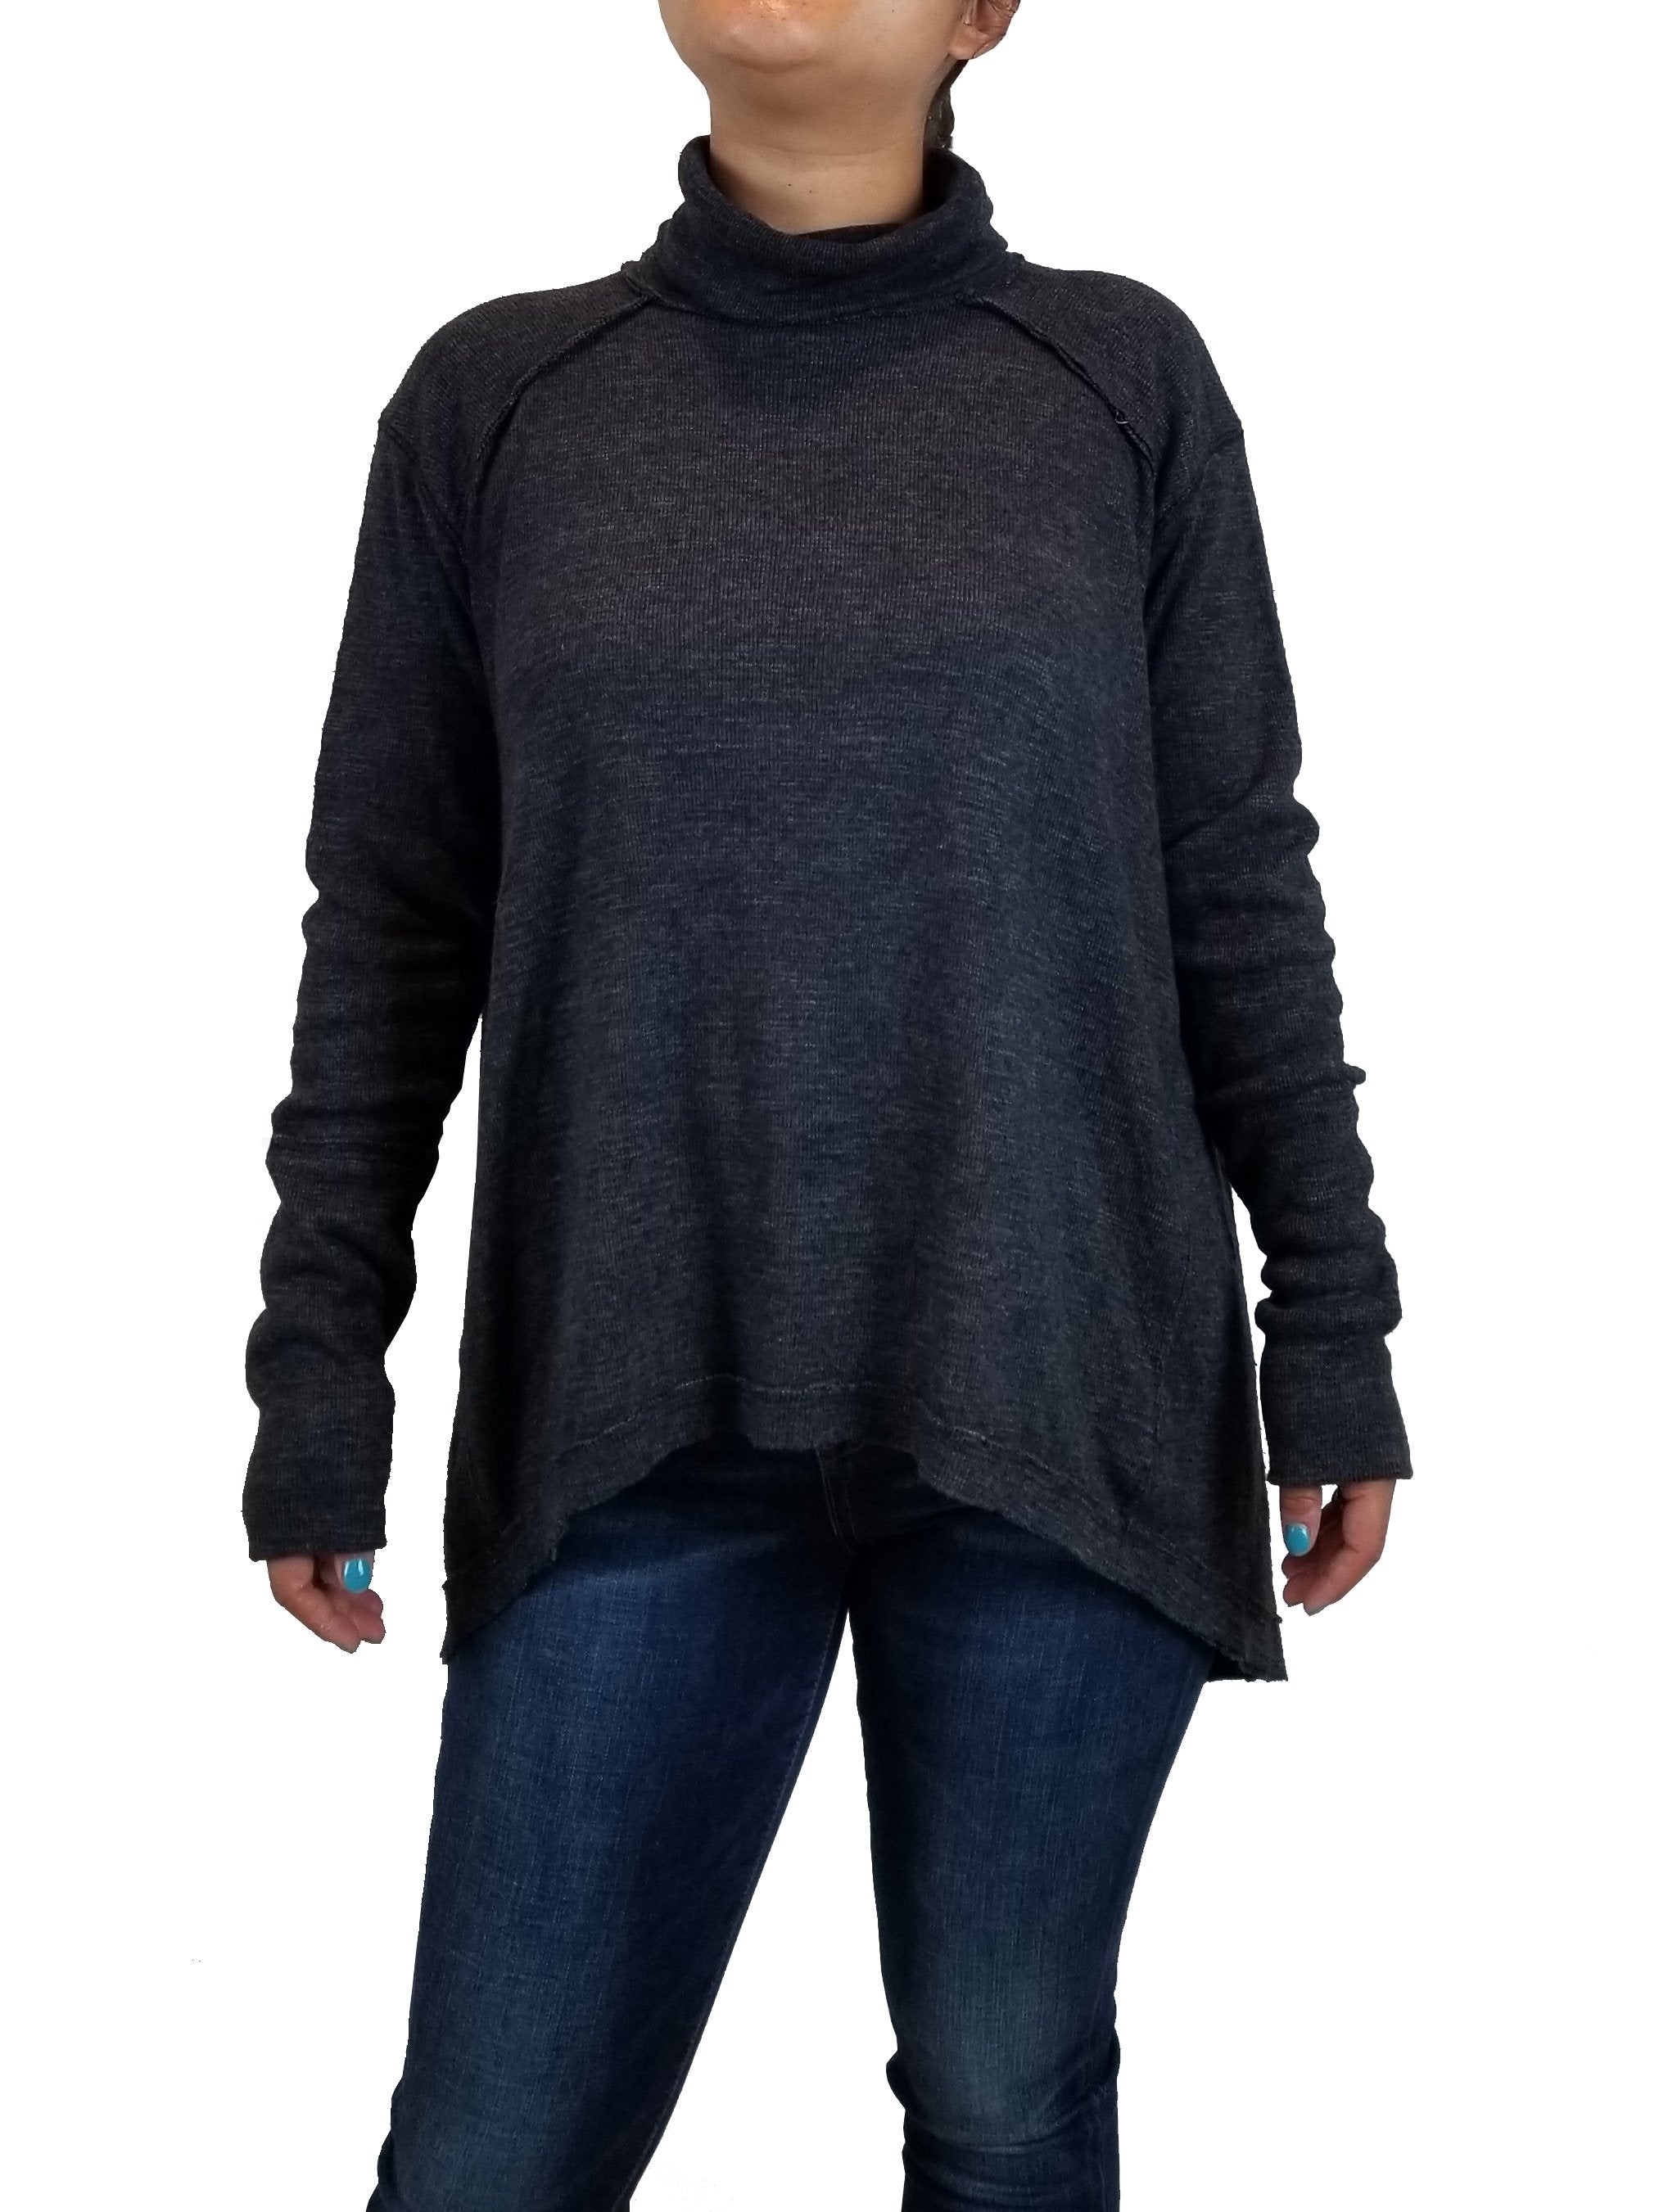 We the free Women's Turtleneck Pullover, Flowy turtleneck pullover for a comfy yet elegant look, Grey, 50% Polyester, 38% Cotton, 12% Rayon, women's Tops, women's Grey Tops, We the free women's Tops, sweater, shirt, turtleneck, loose sweater, women's black turtleneck with open back, all set black oversized backless sweater, wide cut boxy bodice